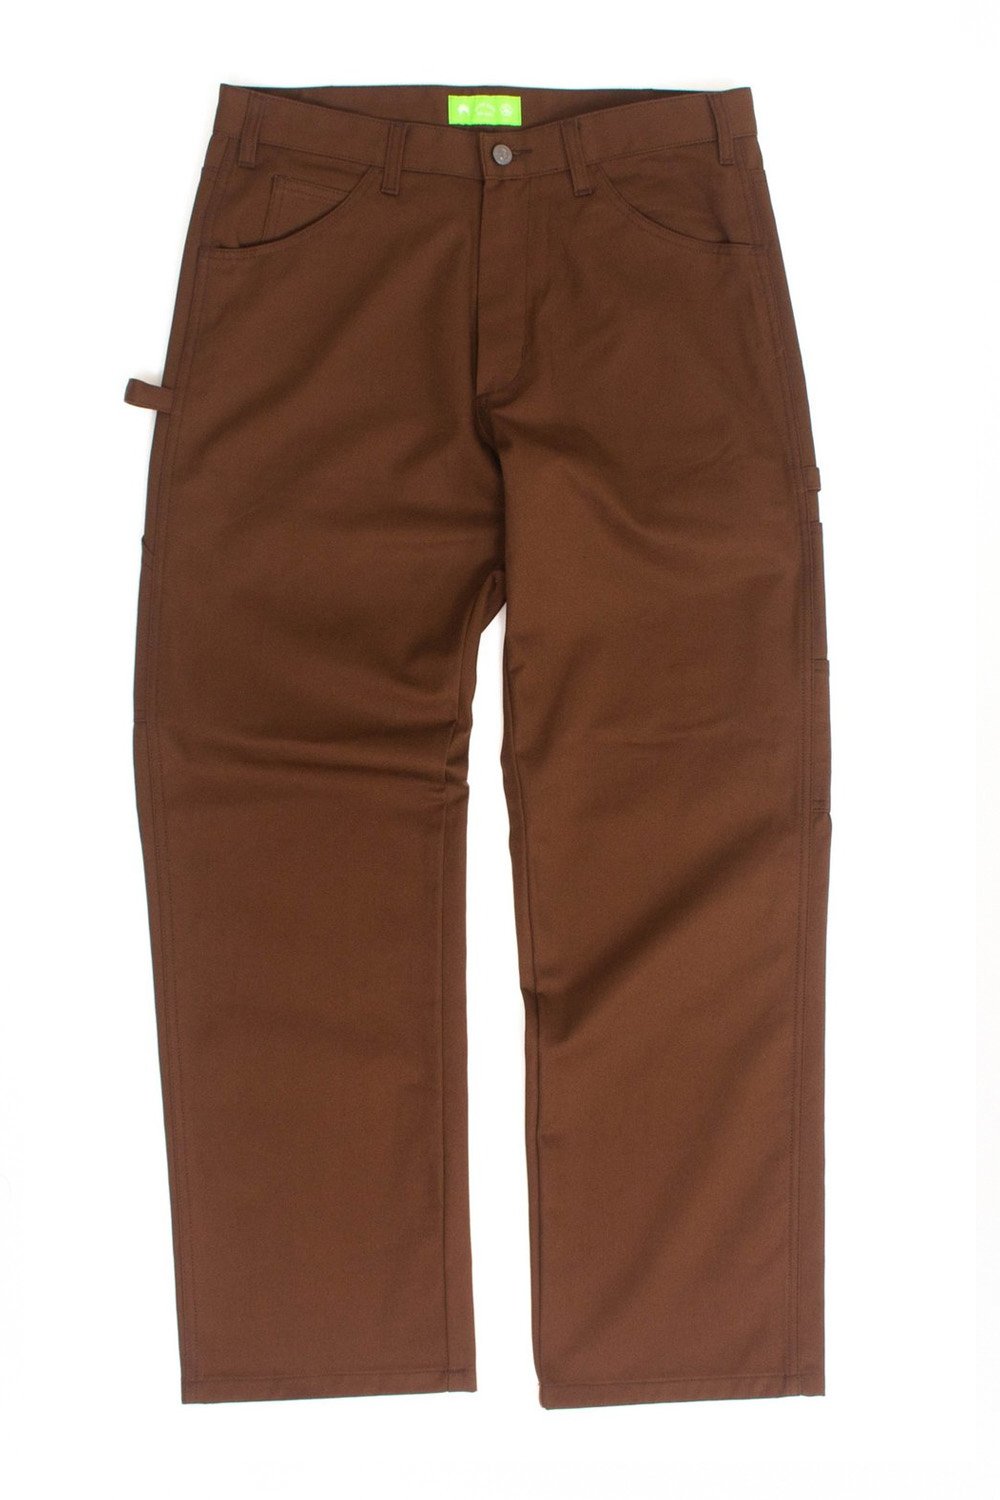 Mister Green - Utility Pant - Coffee — Mister Green Life Store